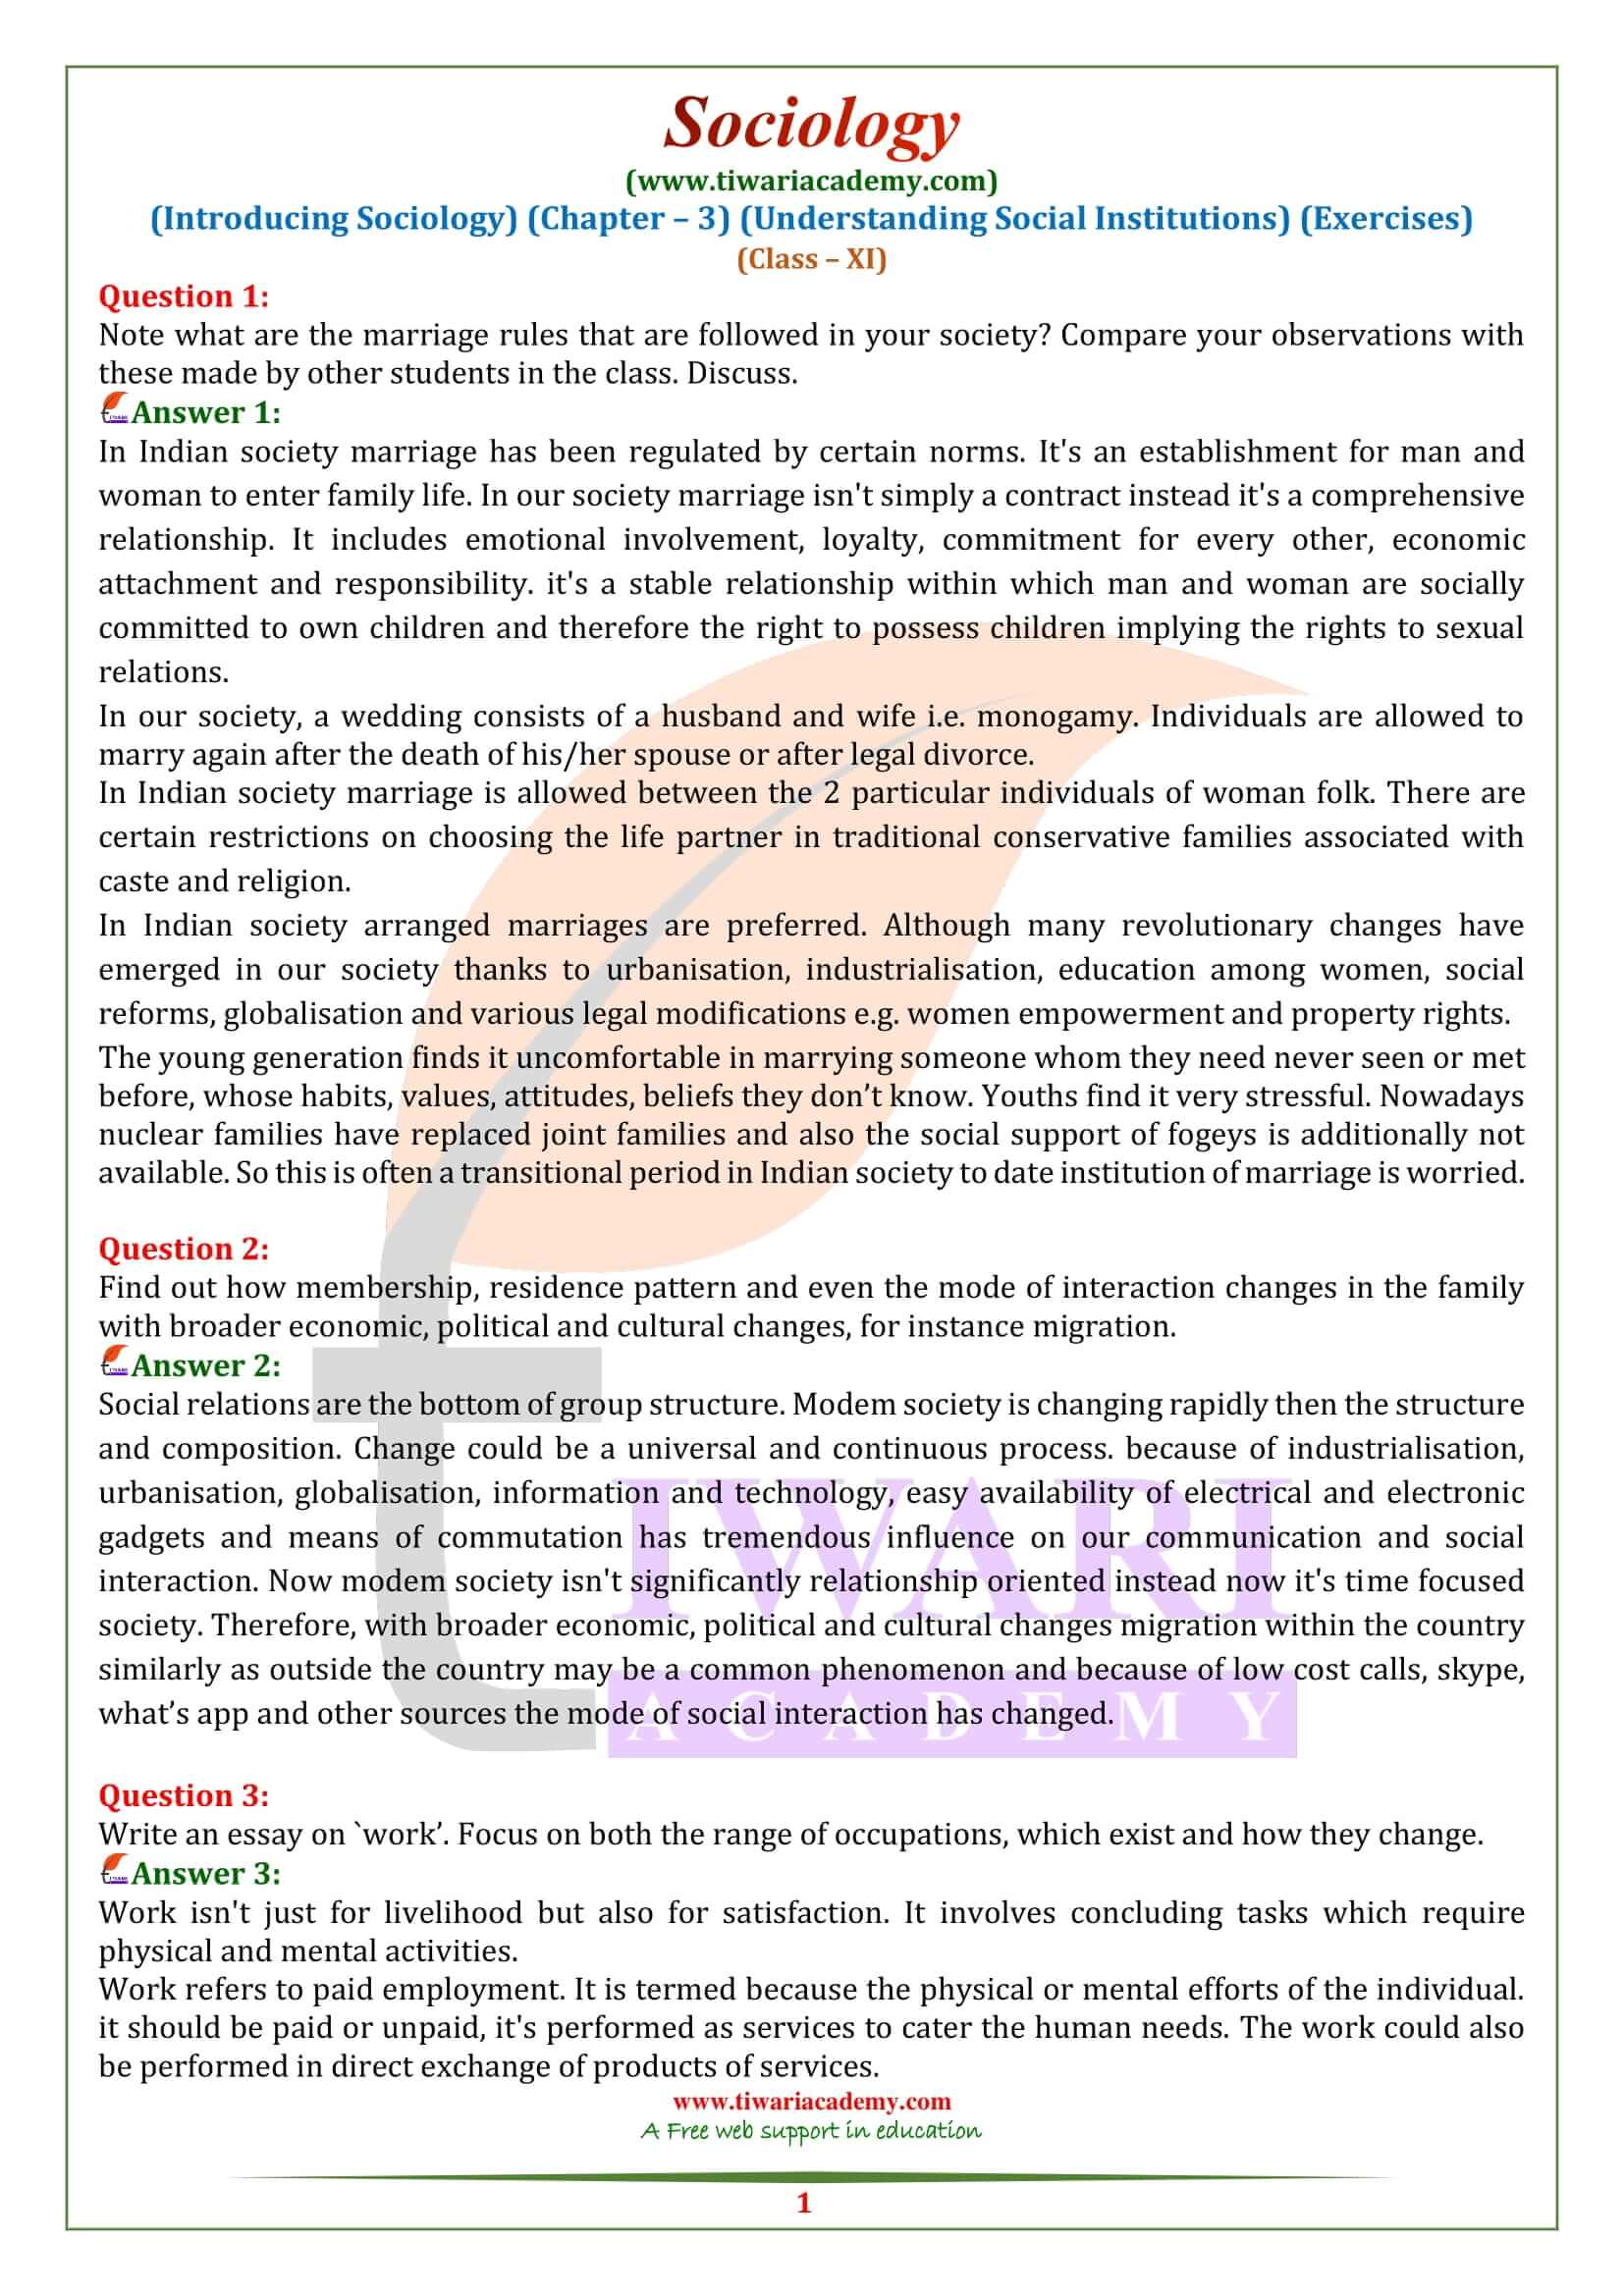 NCERT Solutions for Class 11 Sociology Chapter 3